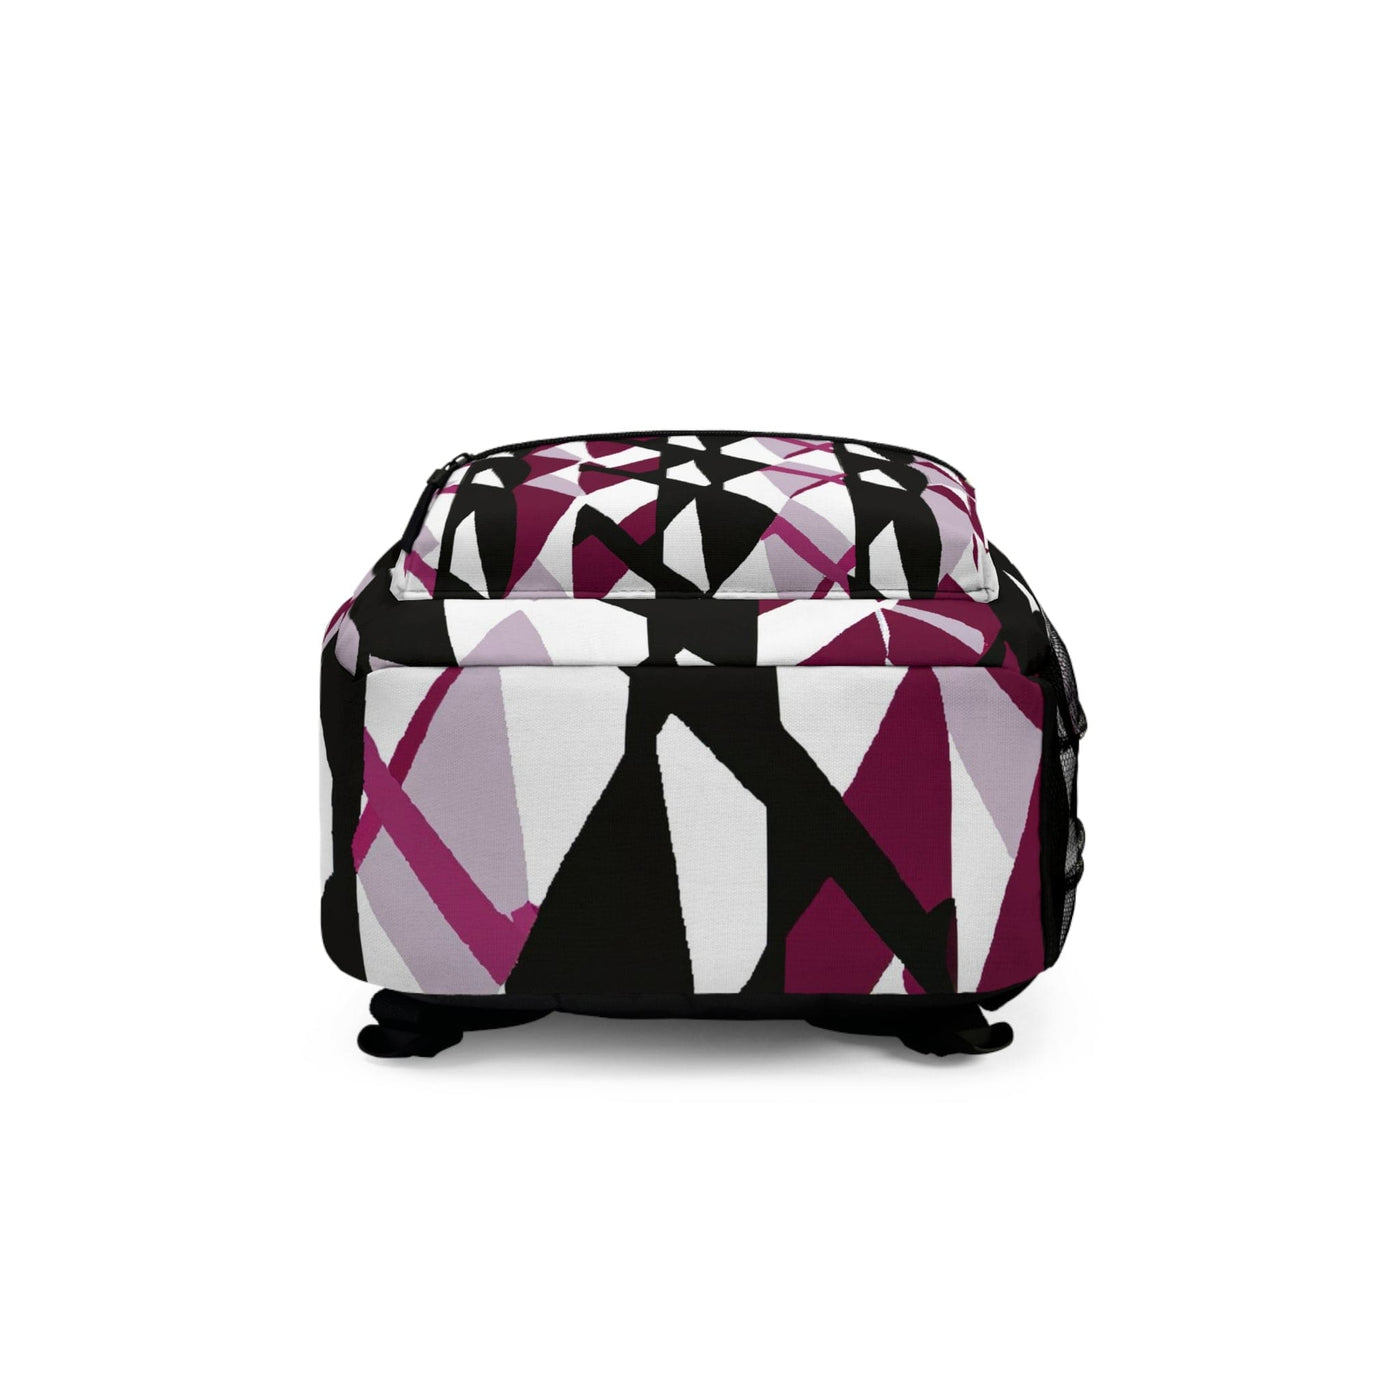 Backpack - Large Water - resistant Bag Mauve Pink And Black Geometric Pattern